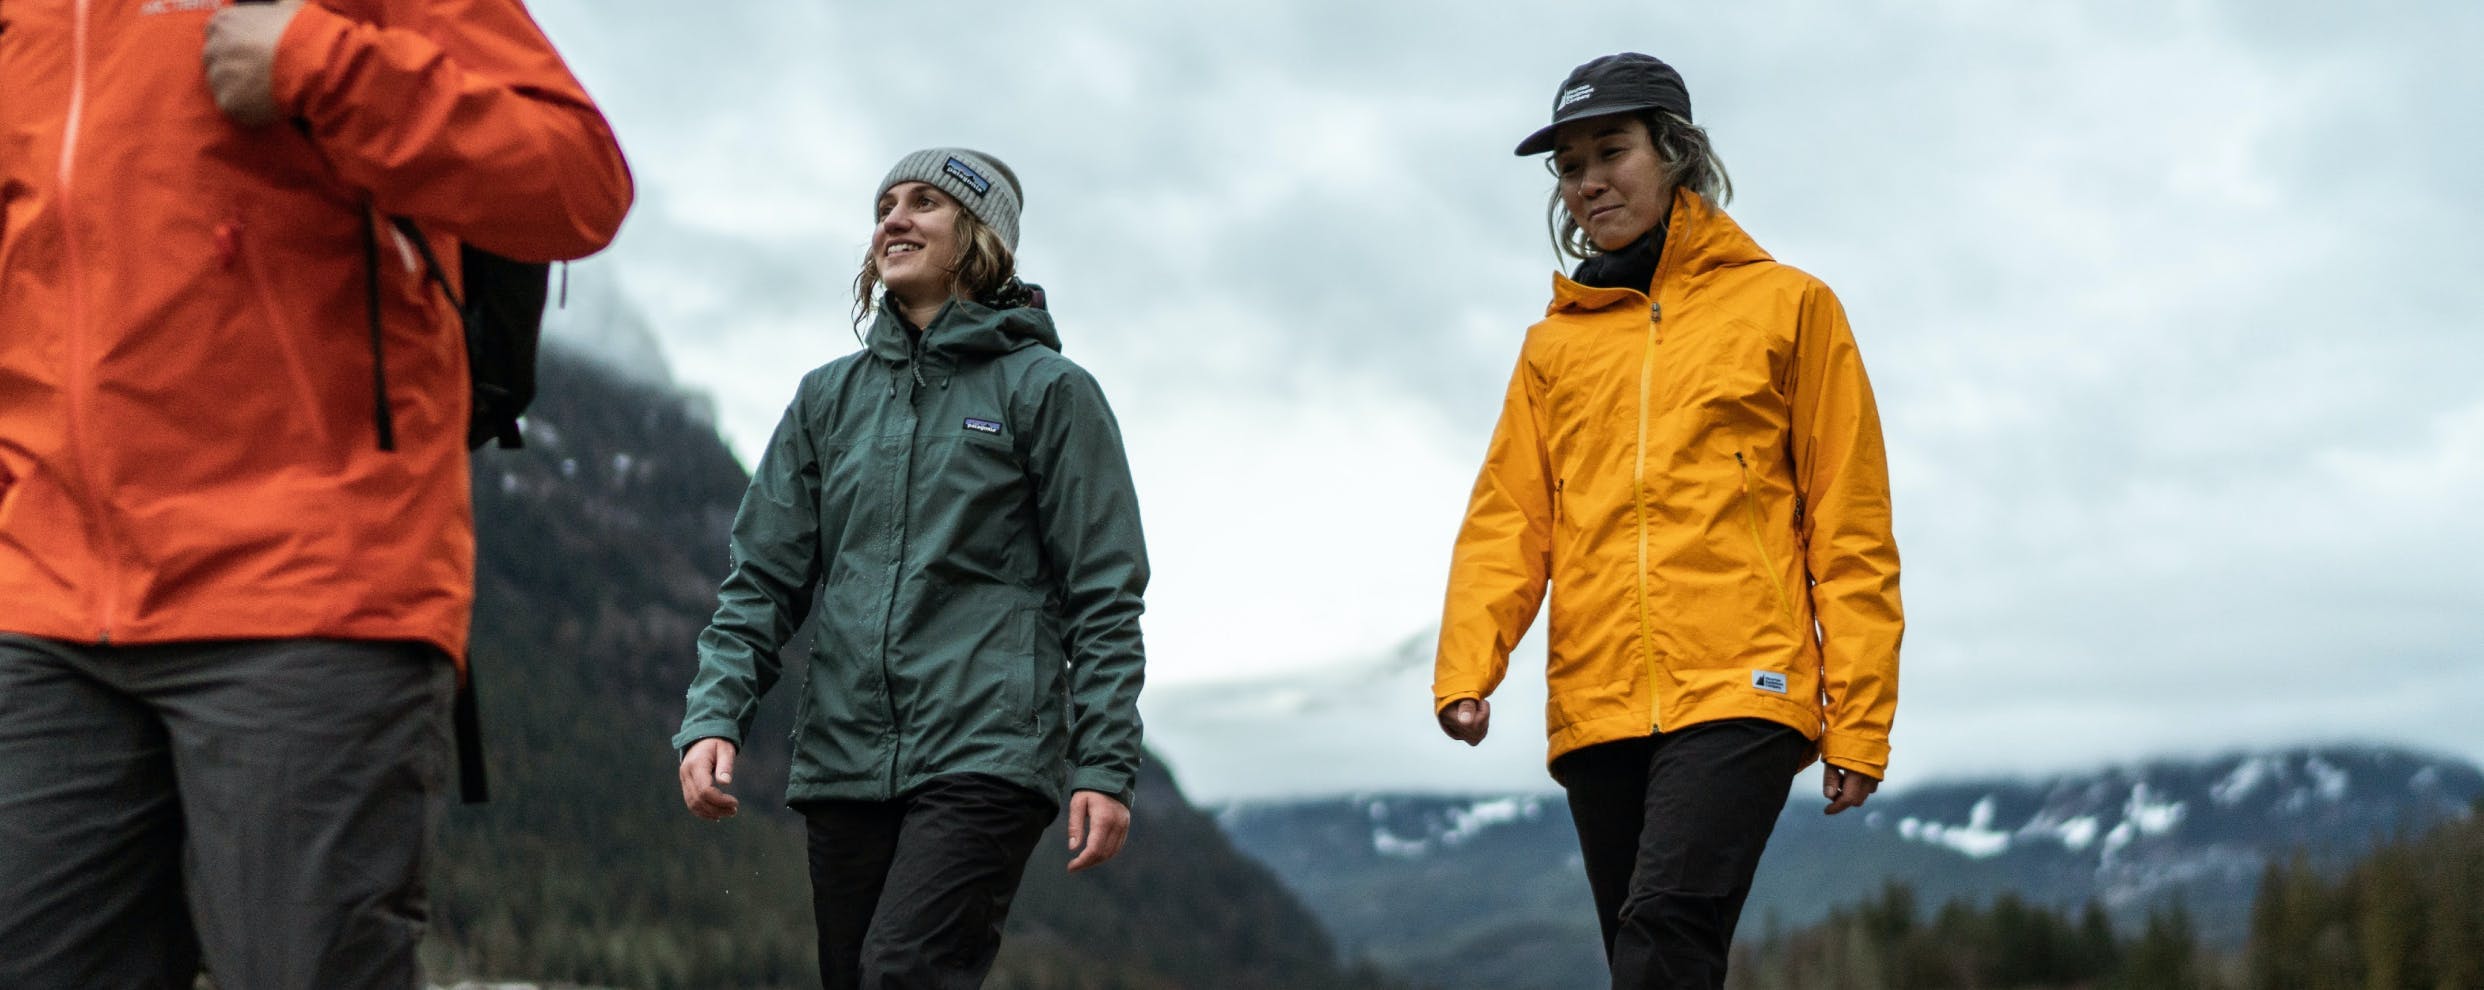 Jackets, pants and accessories to keep you dry on pine needle floors or rocky shores.